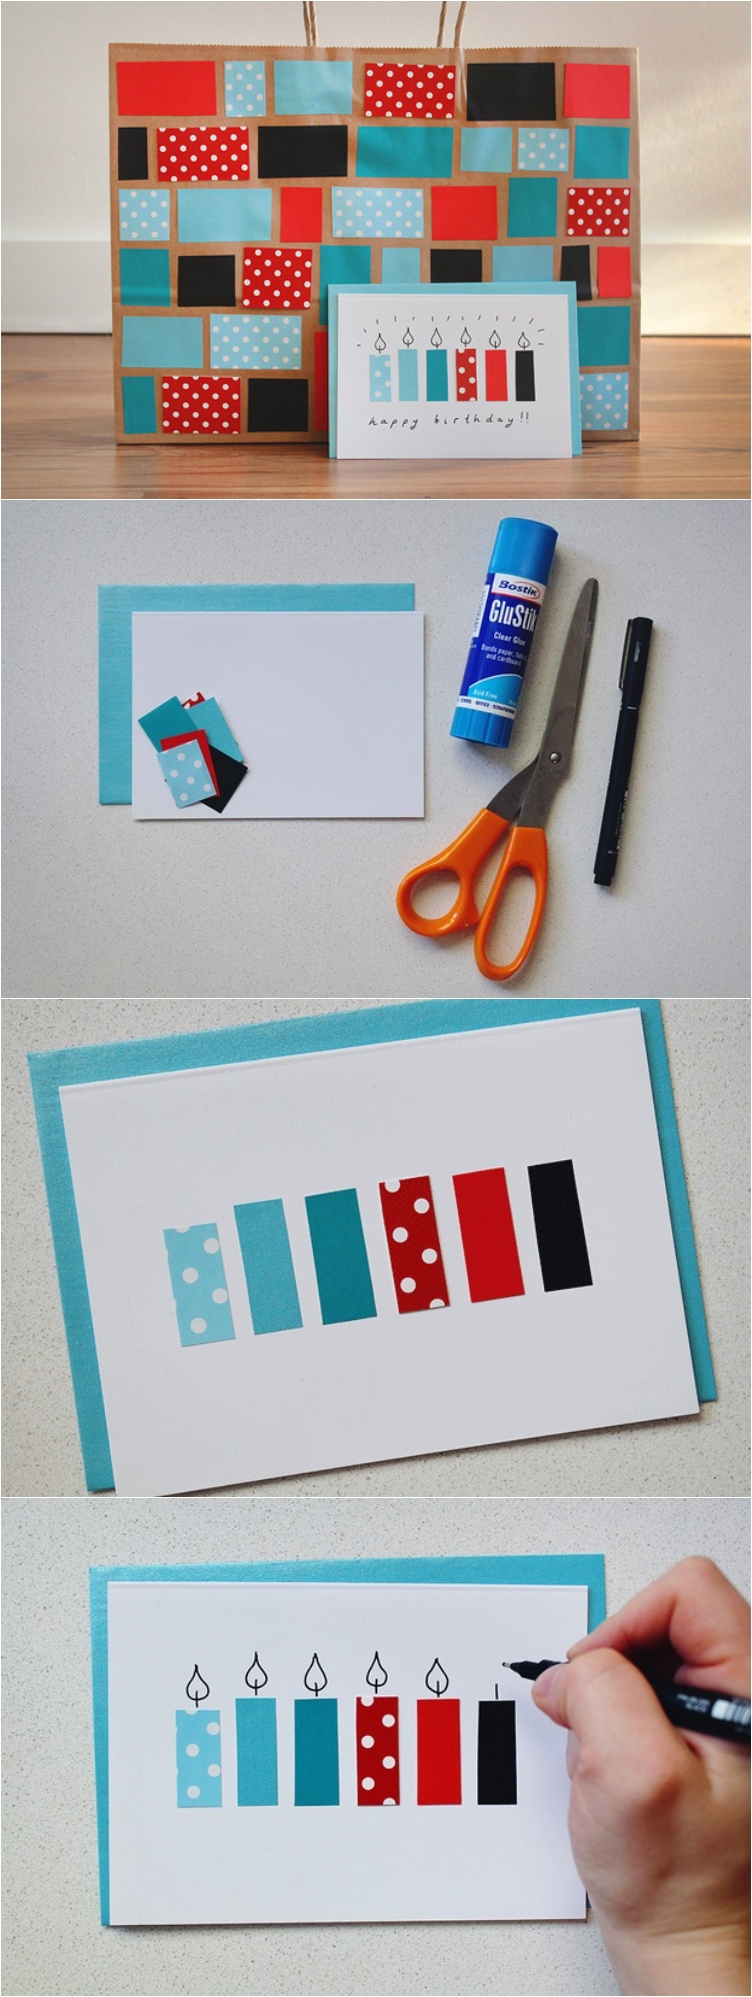 17 Fun and Thoughtful Birthday Cards to DIY